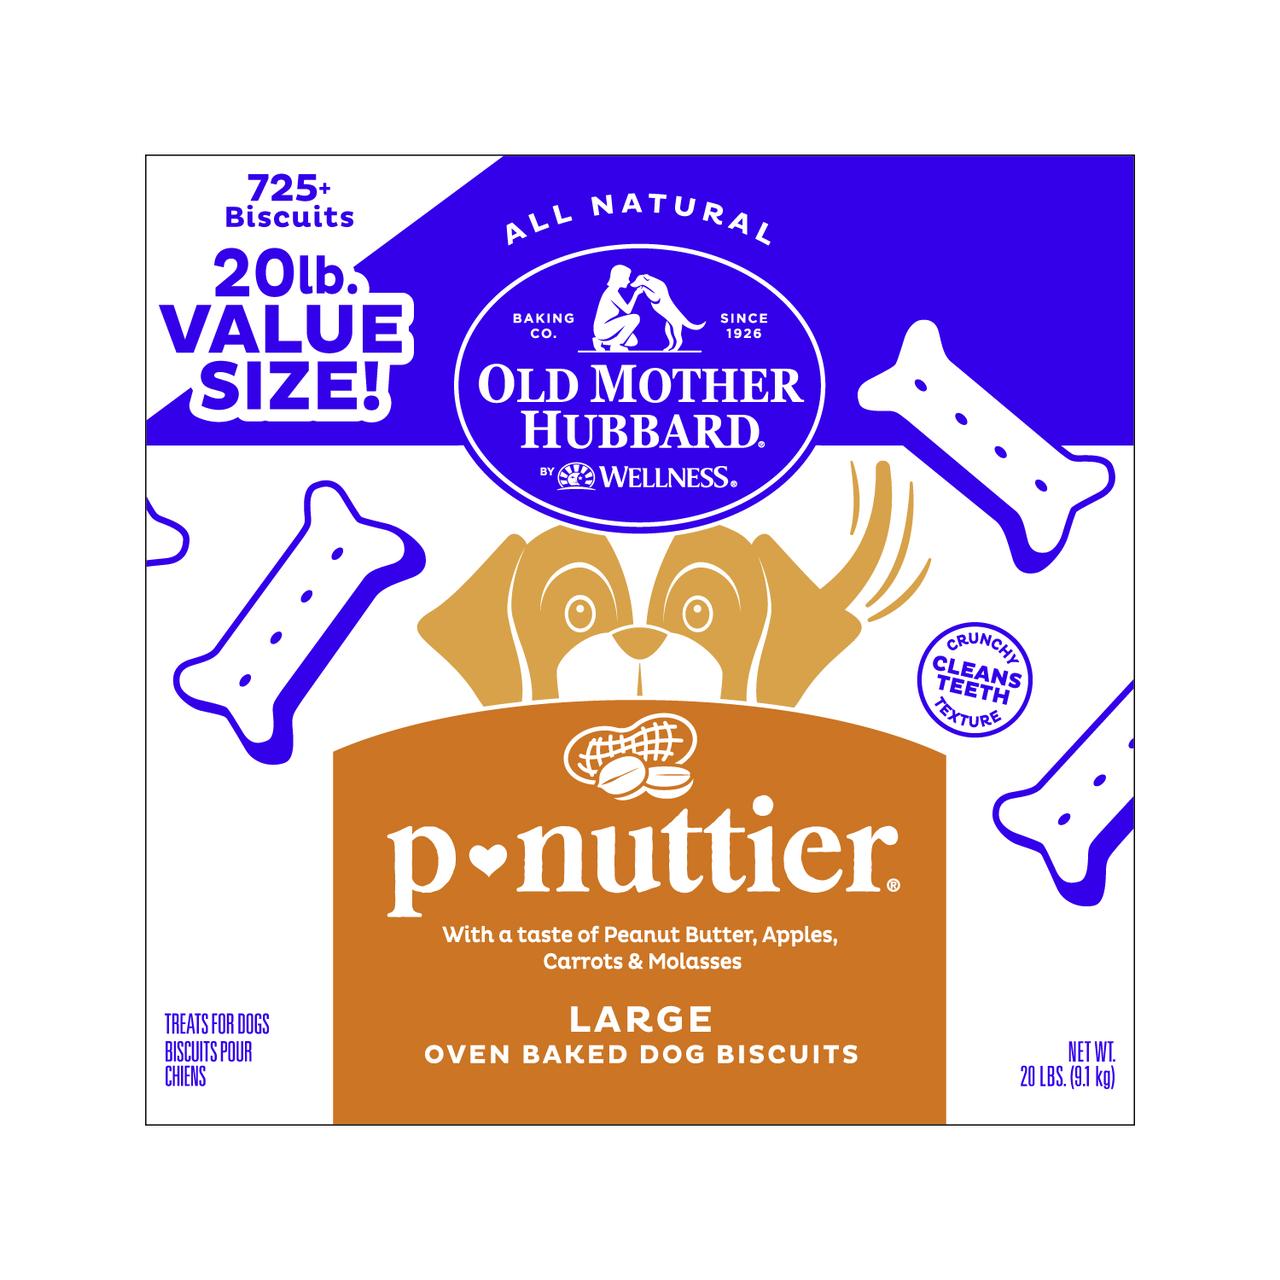 Old Mother Hubbard by Wellness Classic P Nuttier Natural Large Biscuits Dog Treats, 20 lb box - image 1 of 10